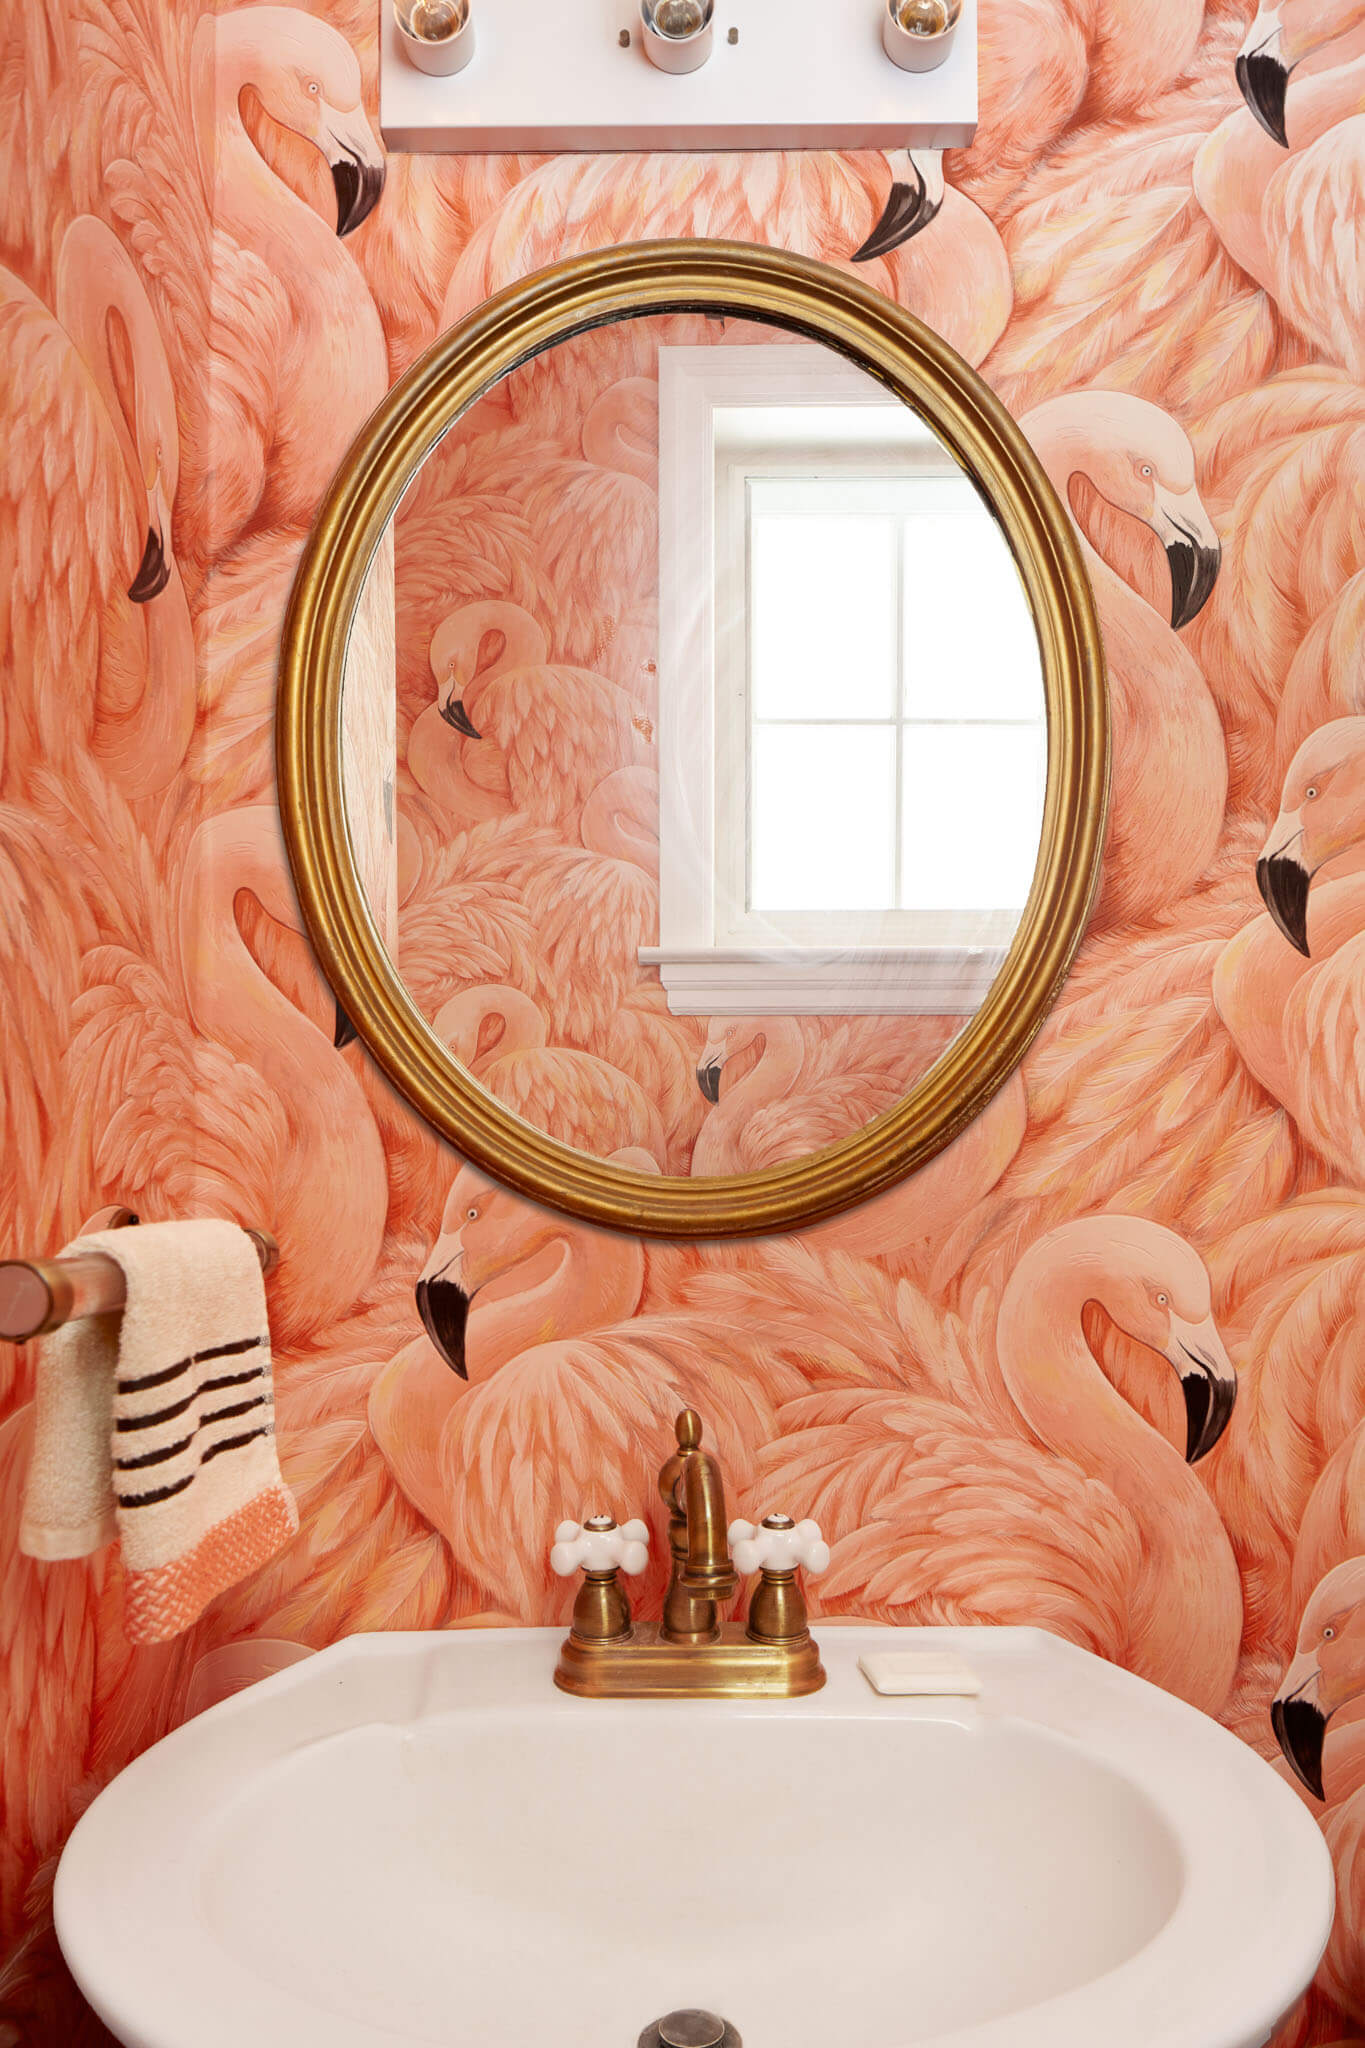 At Home With Michelle Gage - Flamingo Wallpaper Bathroom - HD Wallpaper 